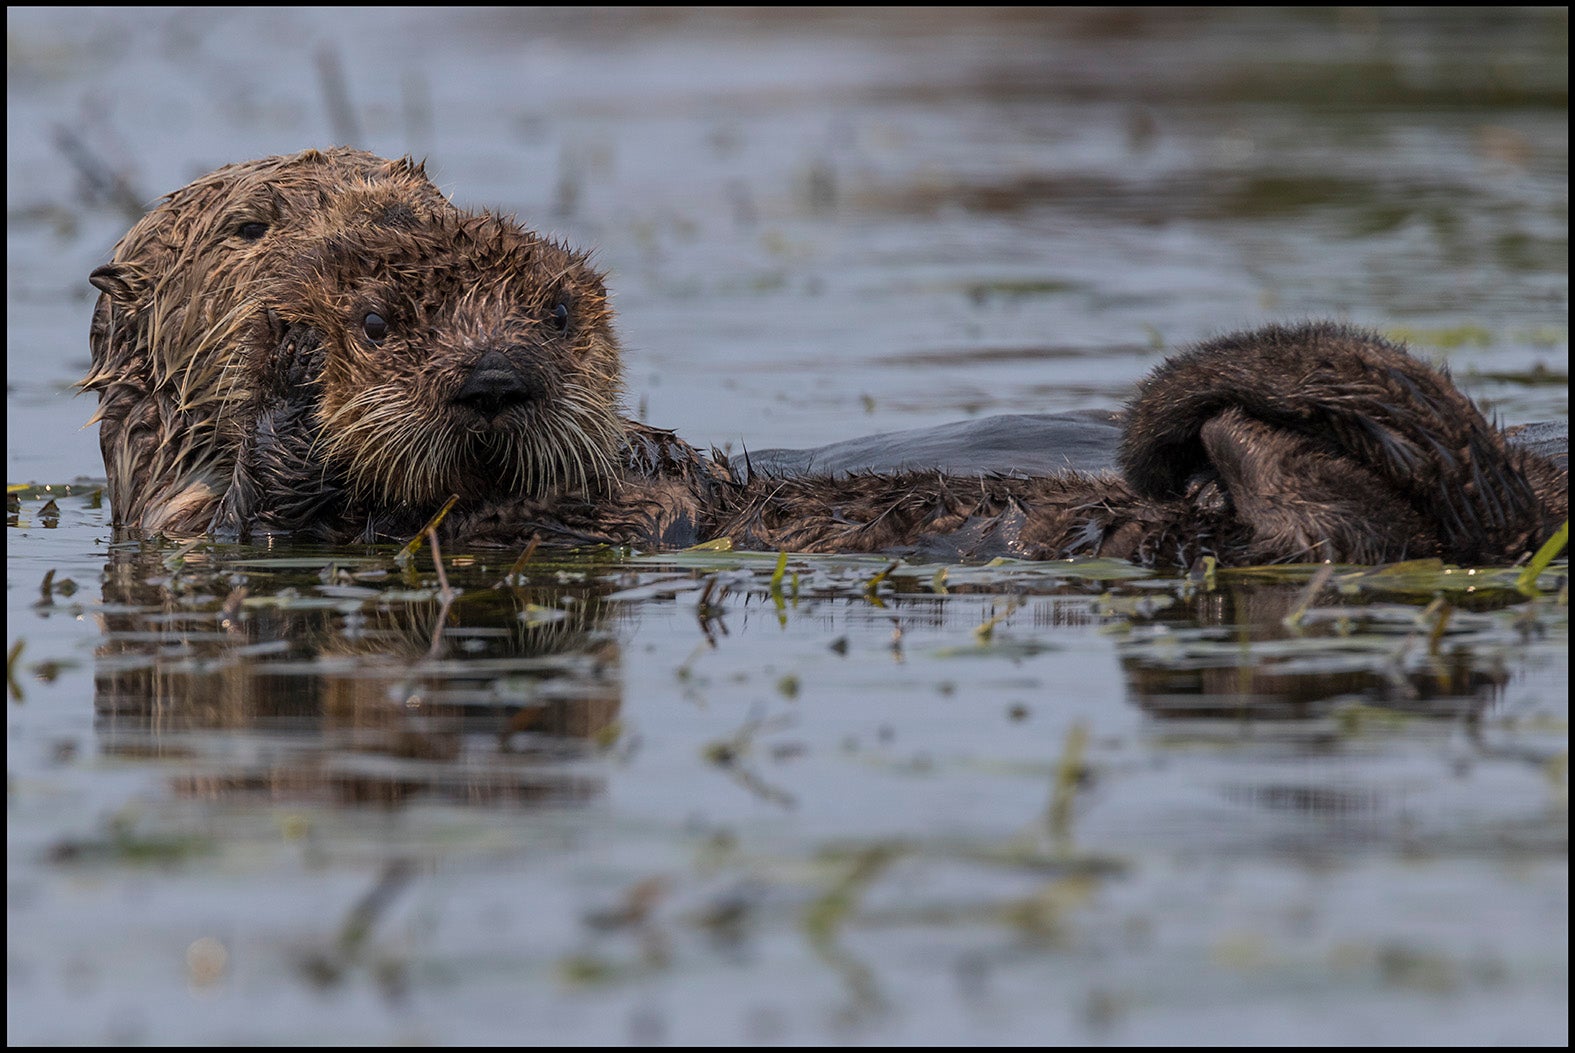 Southern sea otter and its baby in Moss Landing, California.